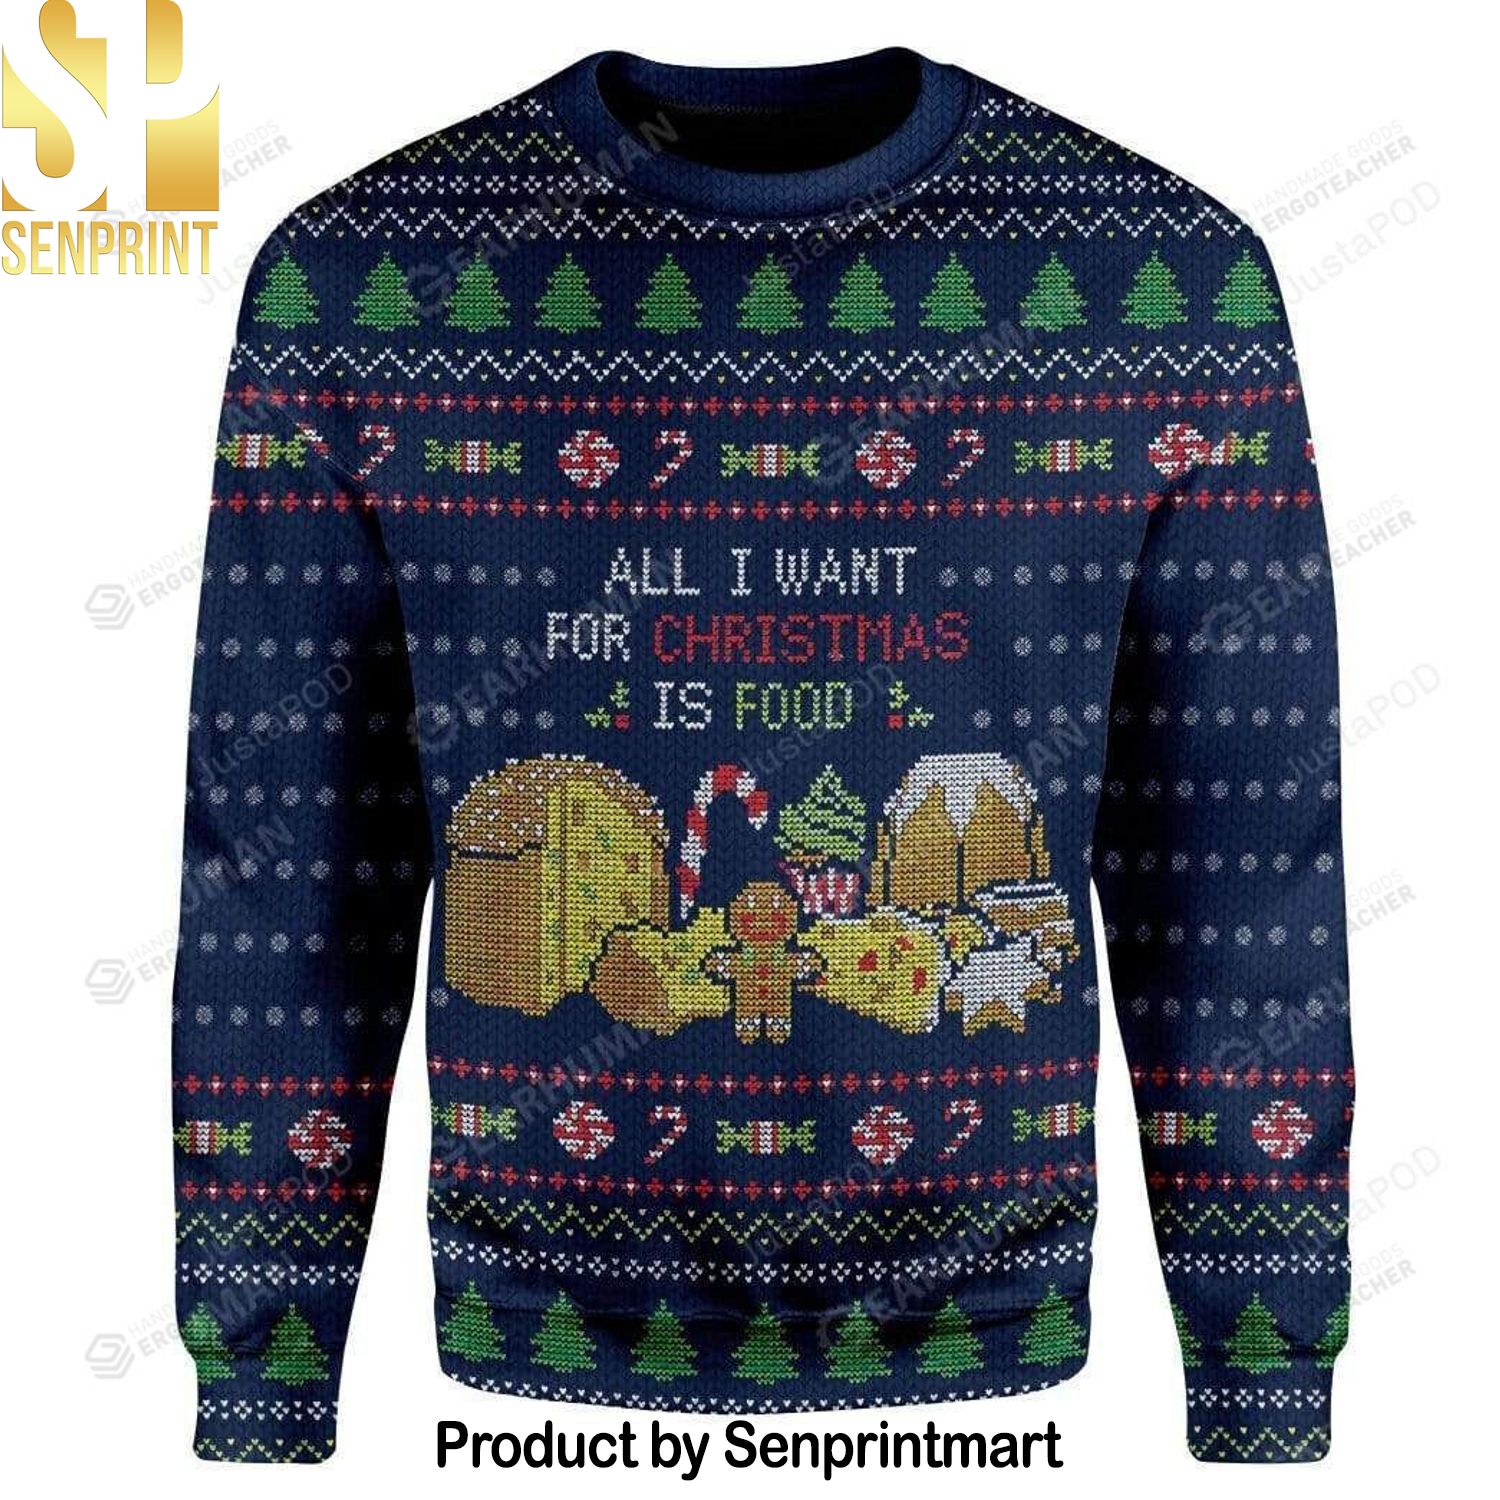 All I Want For Christmas Is Food Knitting Pattern Ugly Christmas Sweater